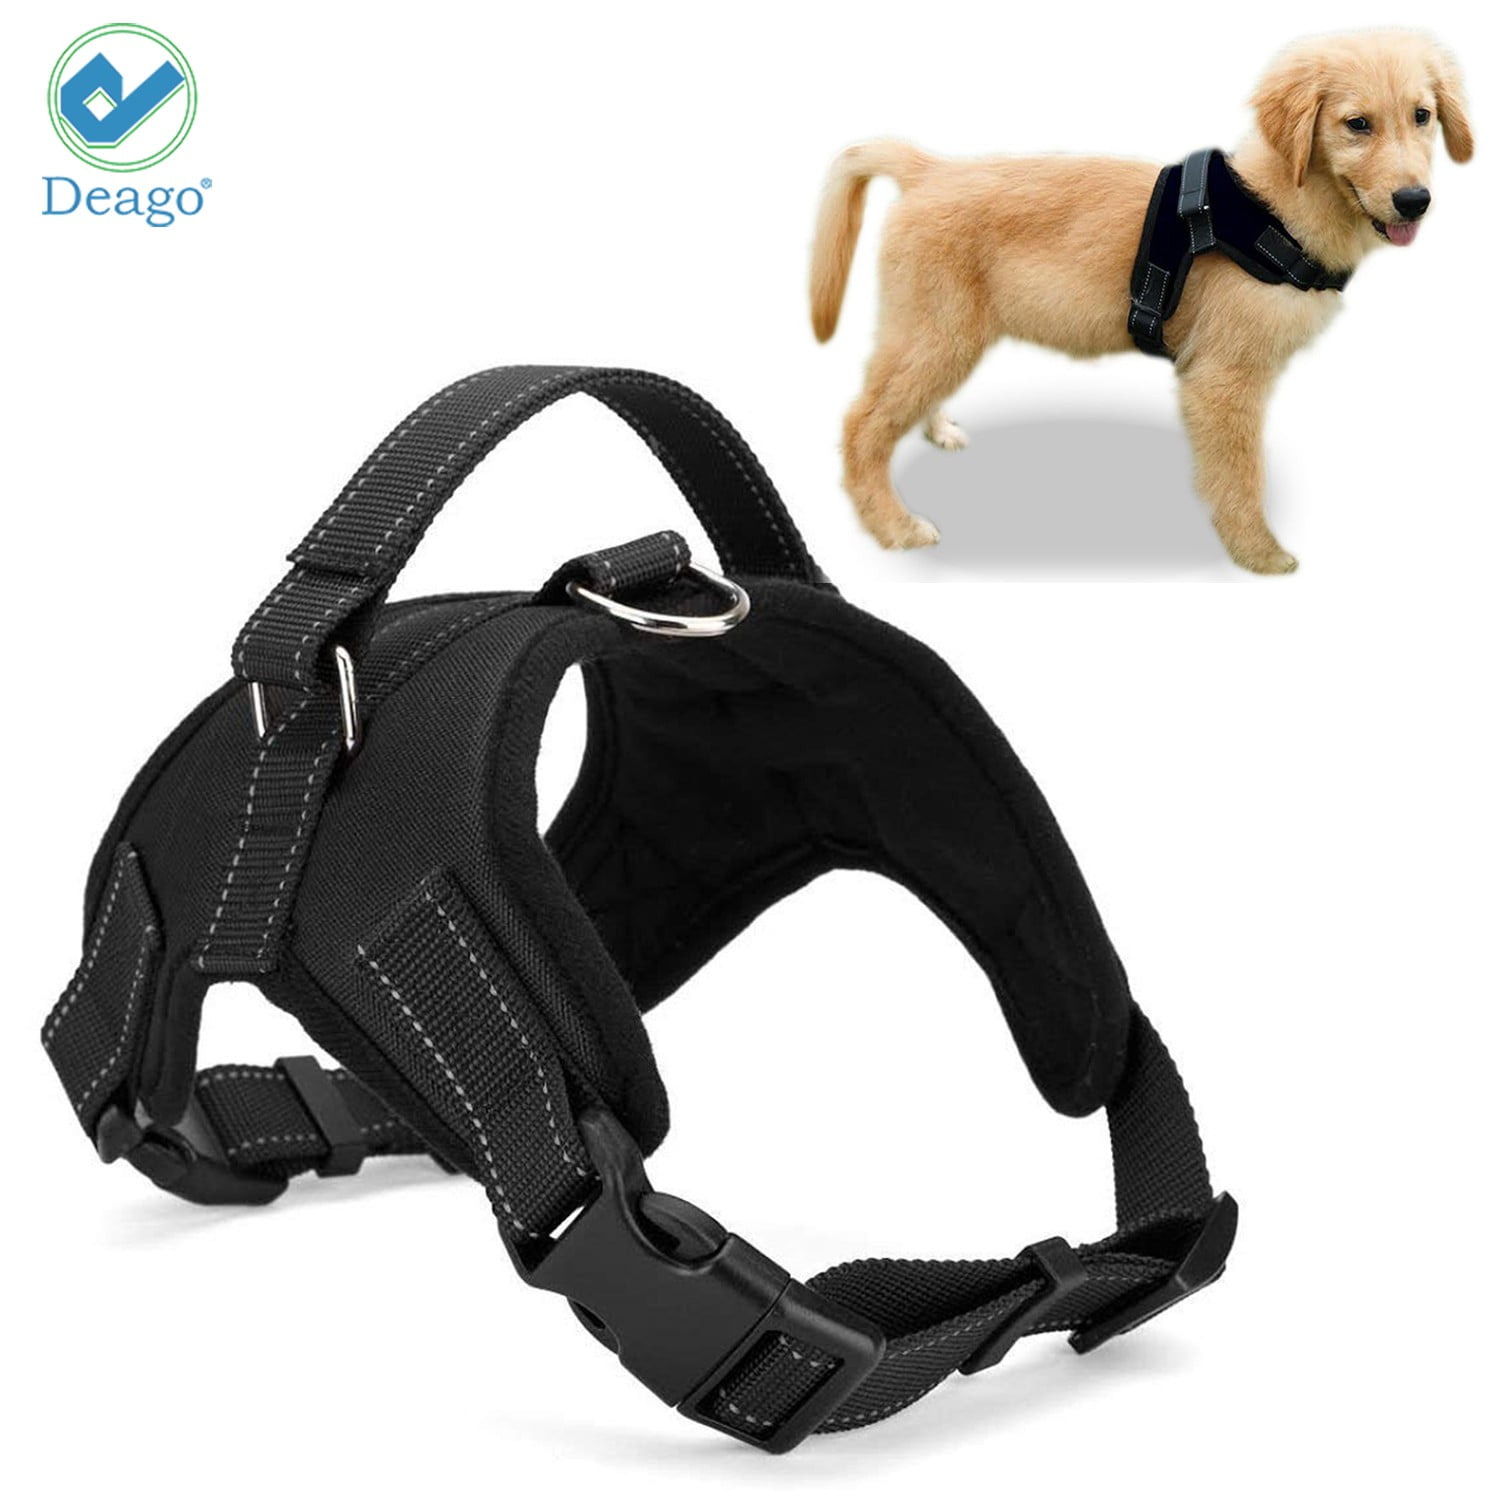 Dog Lift Support Harness for Outdoor Training Walking Black M rabbitgoo Escape-Proof Dog Harness No-Pull Adjustable Reflective Working Pet Vest Dog Harness with Handle